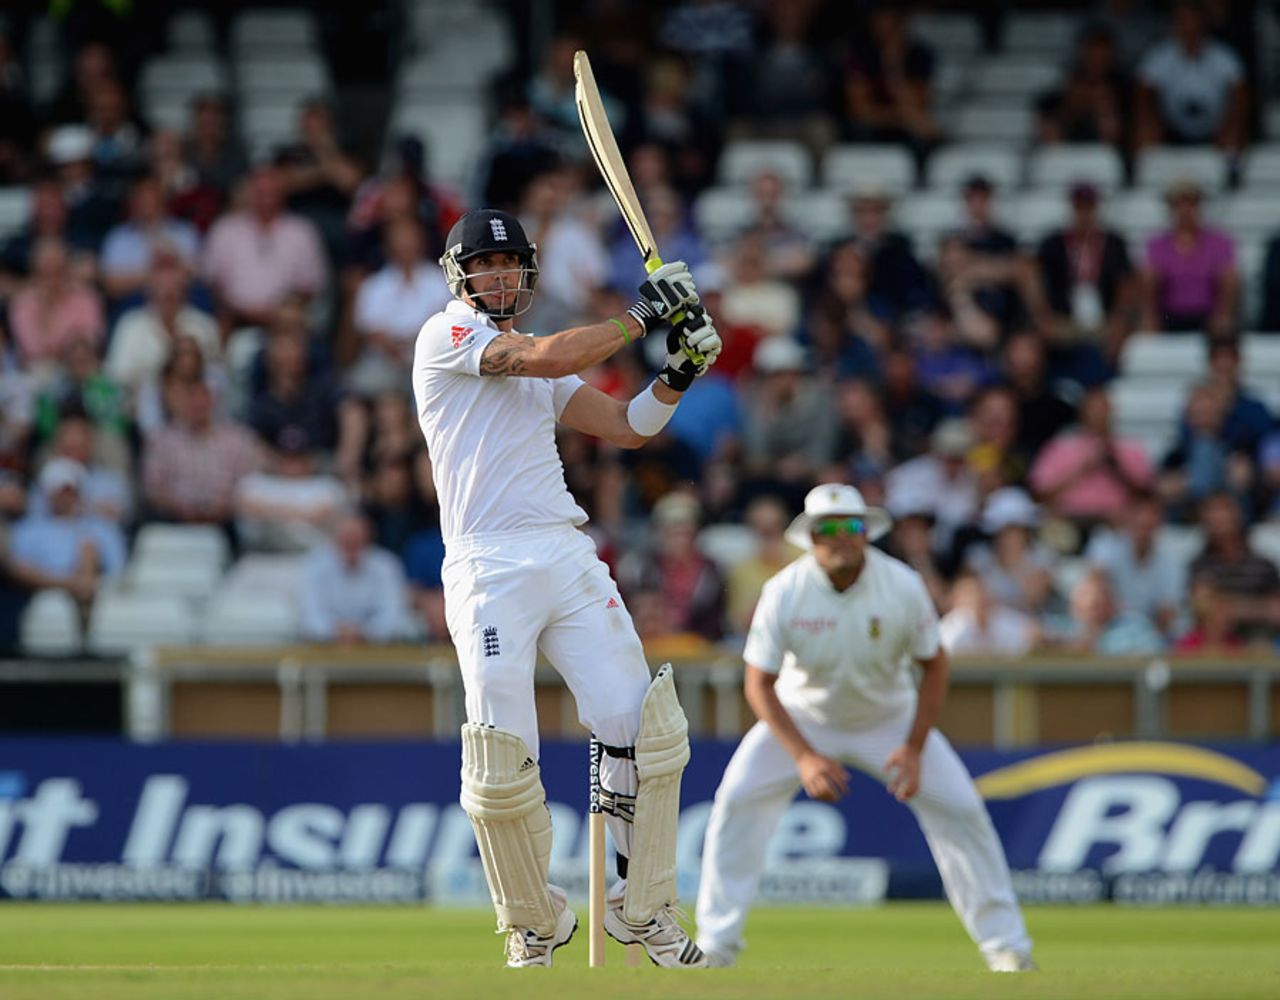 It was a thrilling innings by Kevin Pietersen to lift England, England v South Africa, 2nd Investec Test, Headingley, 3rd day, August 4, 2012